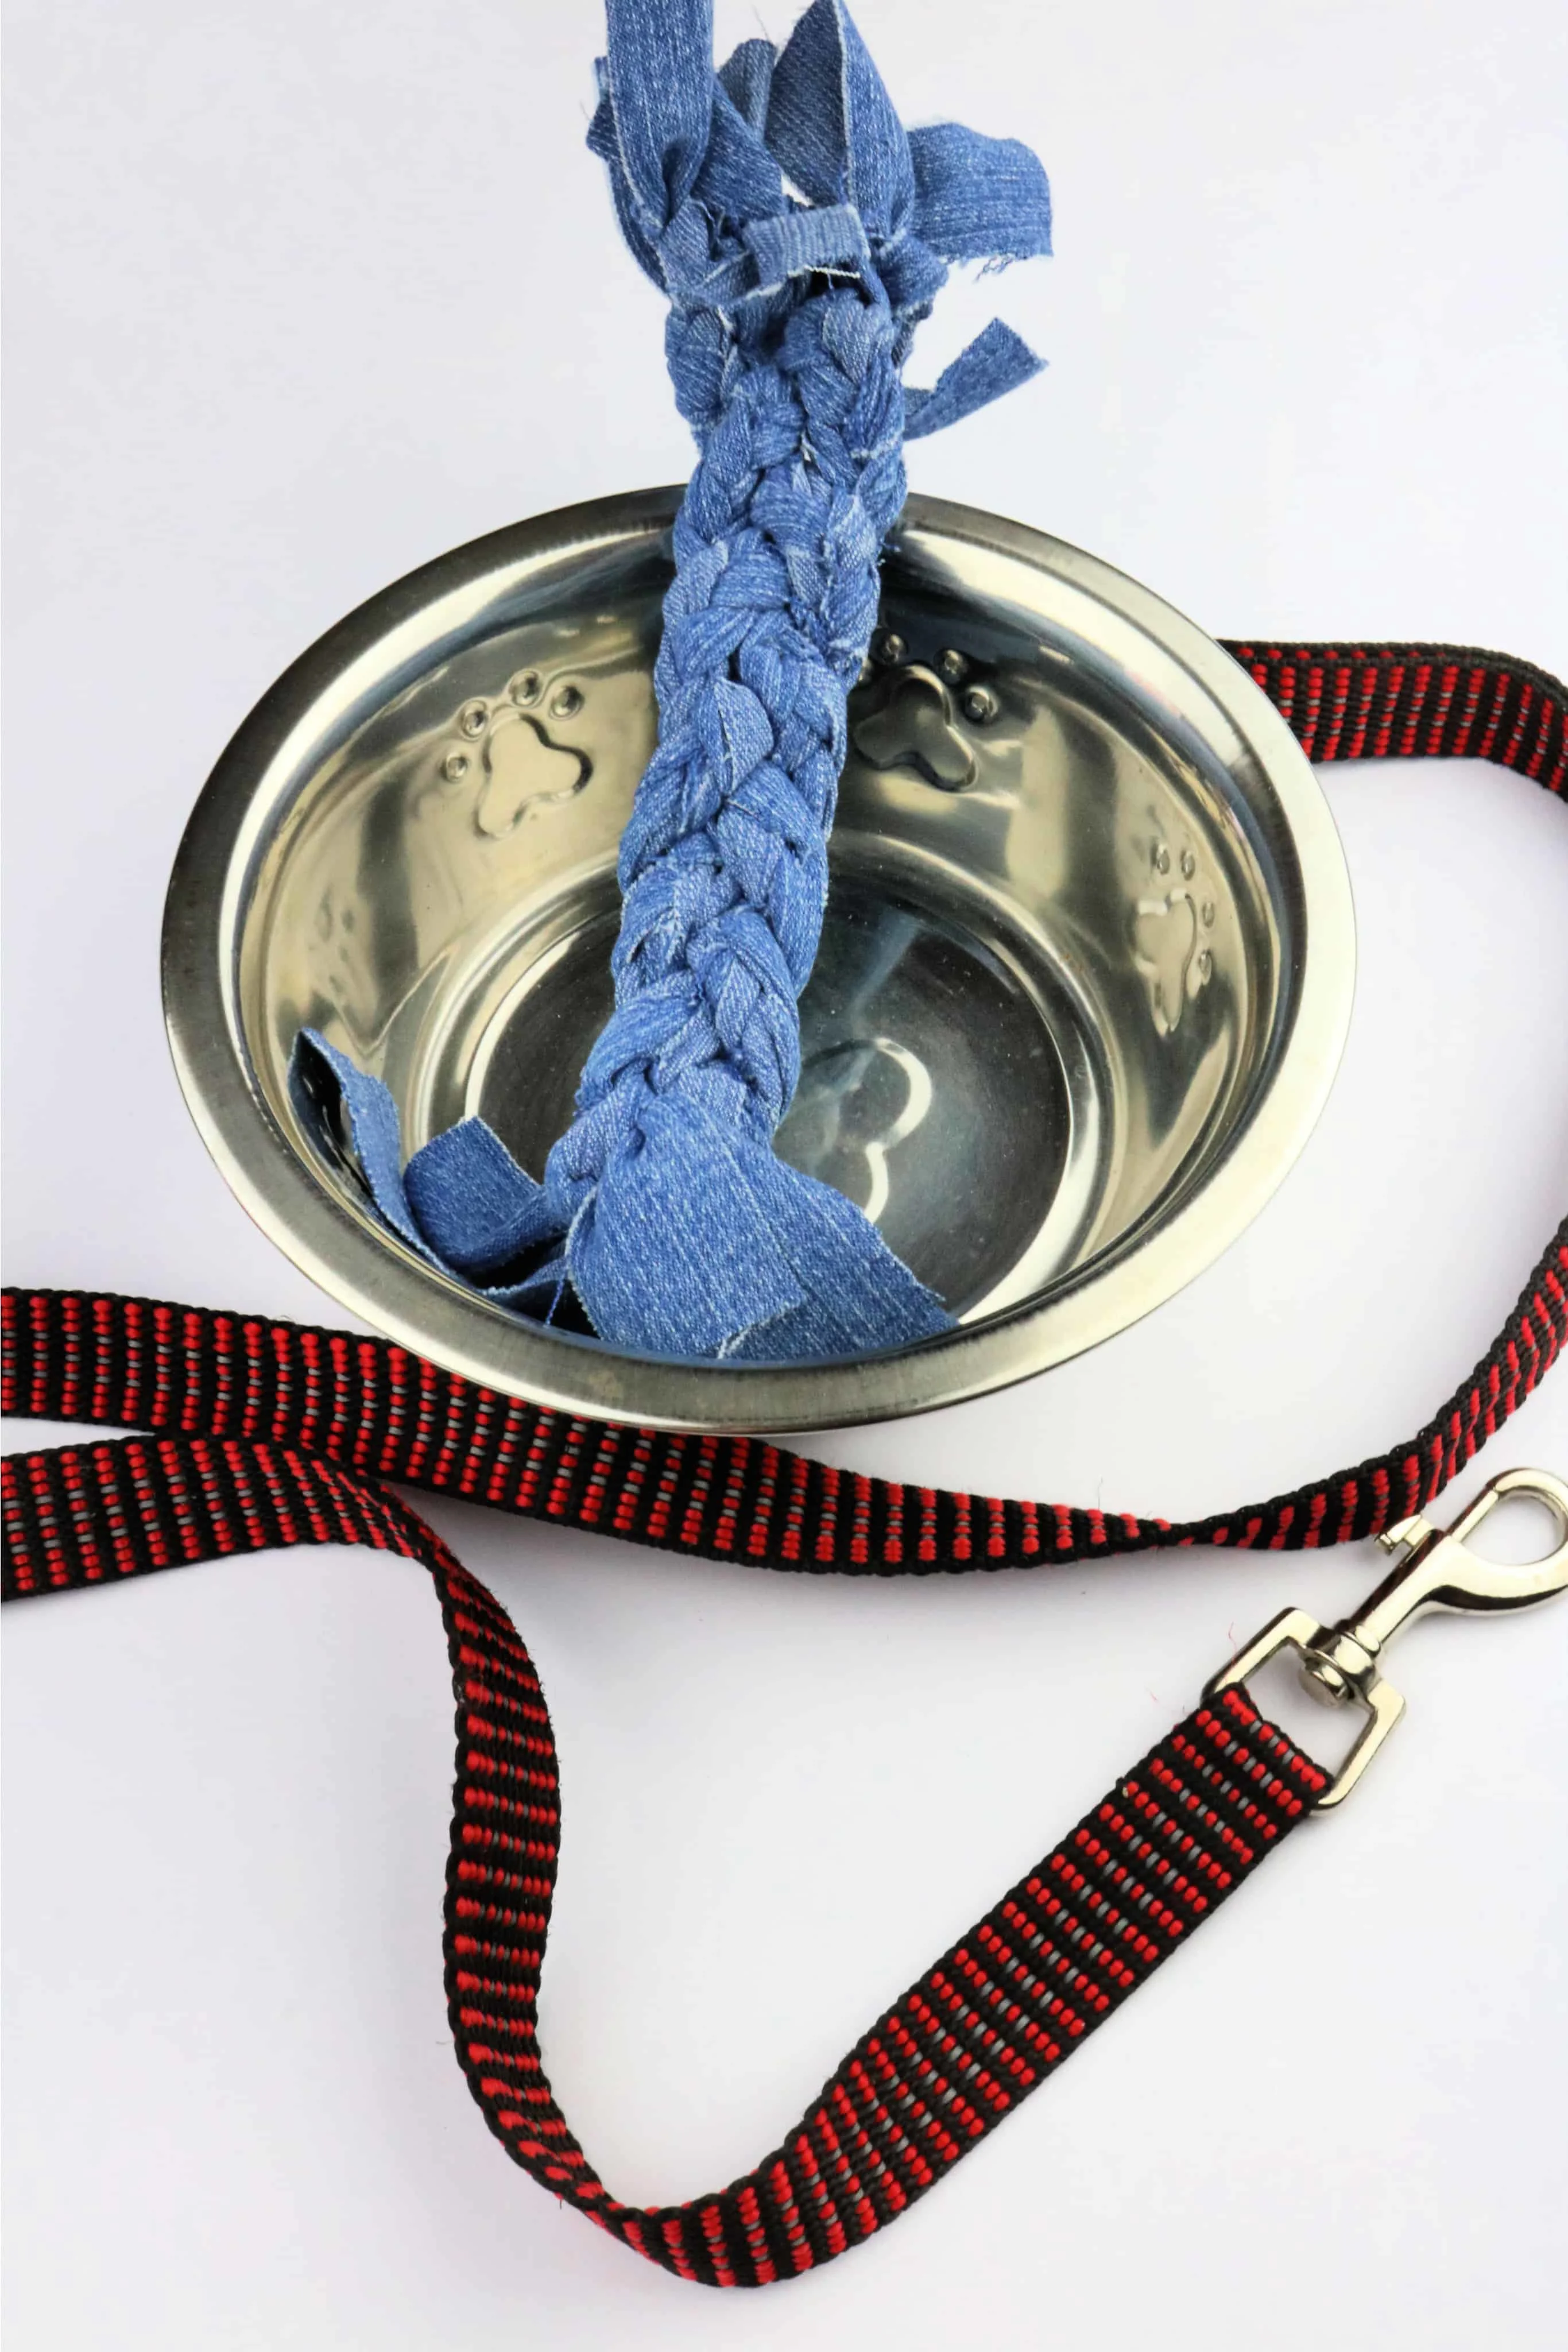 Denim Dog Toy in water bowl with leash